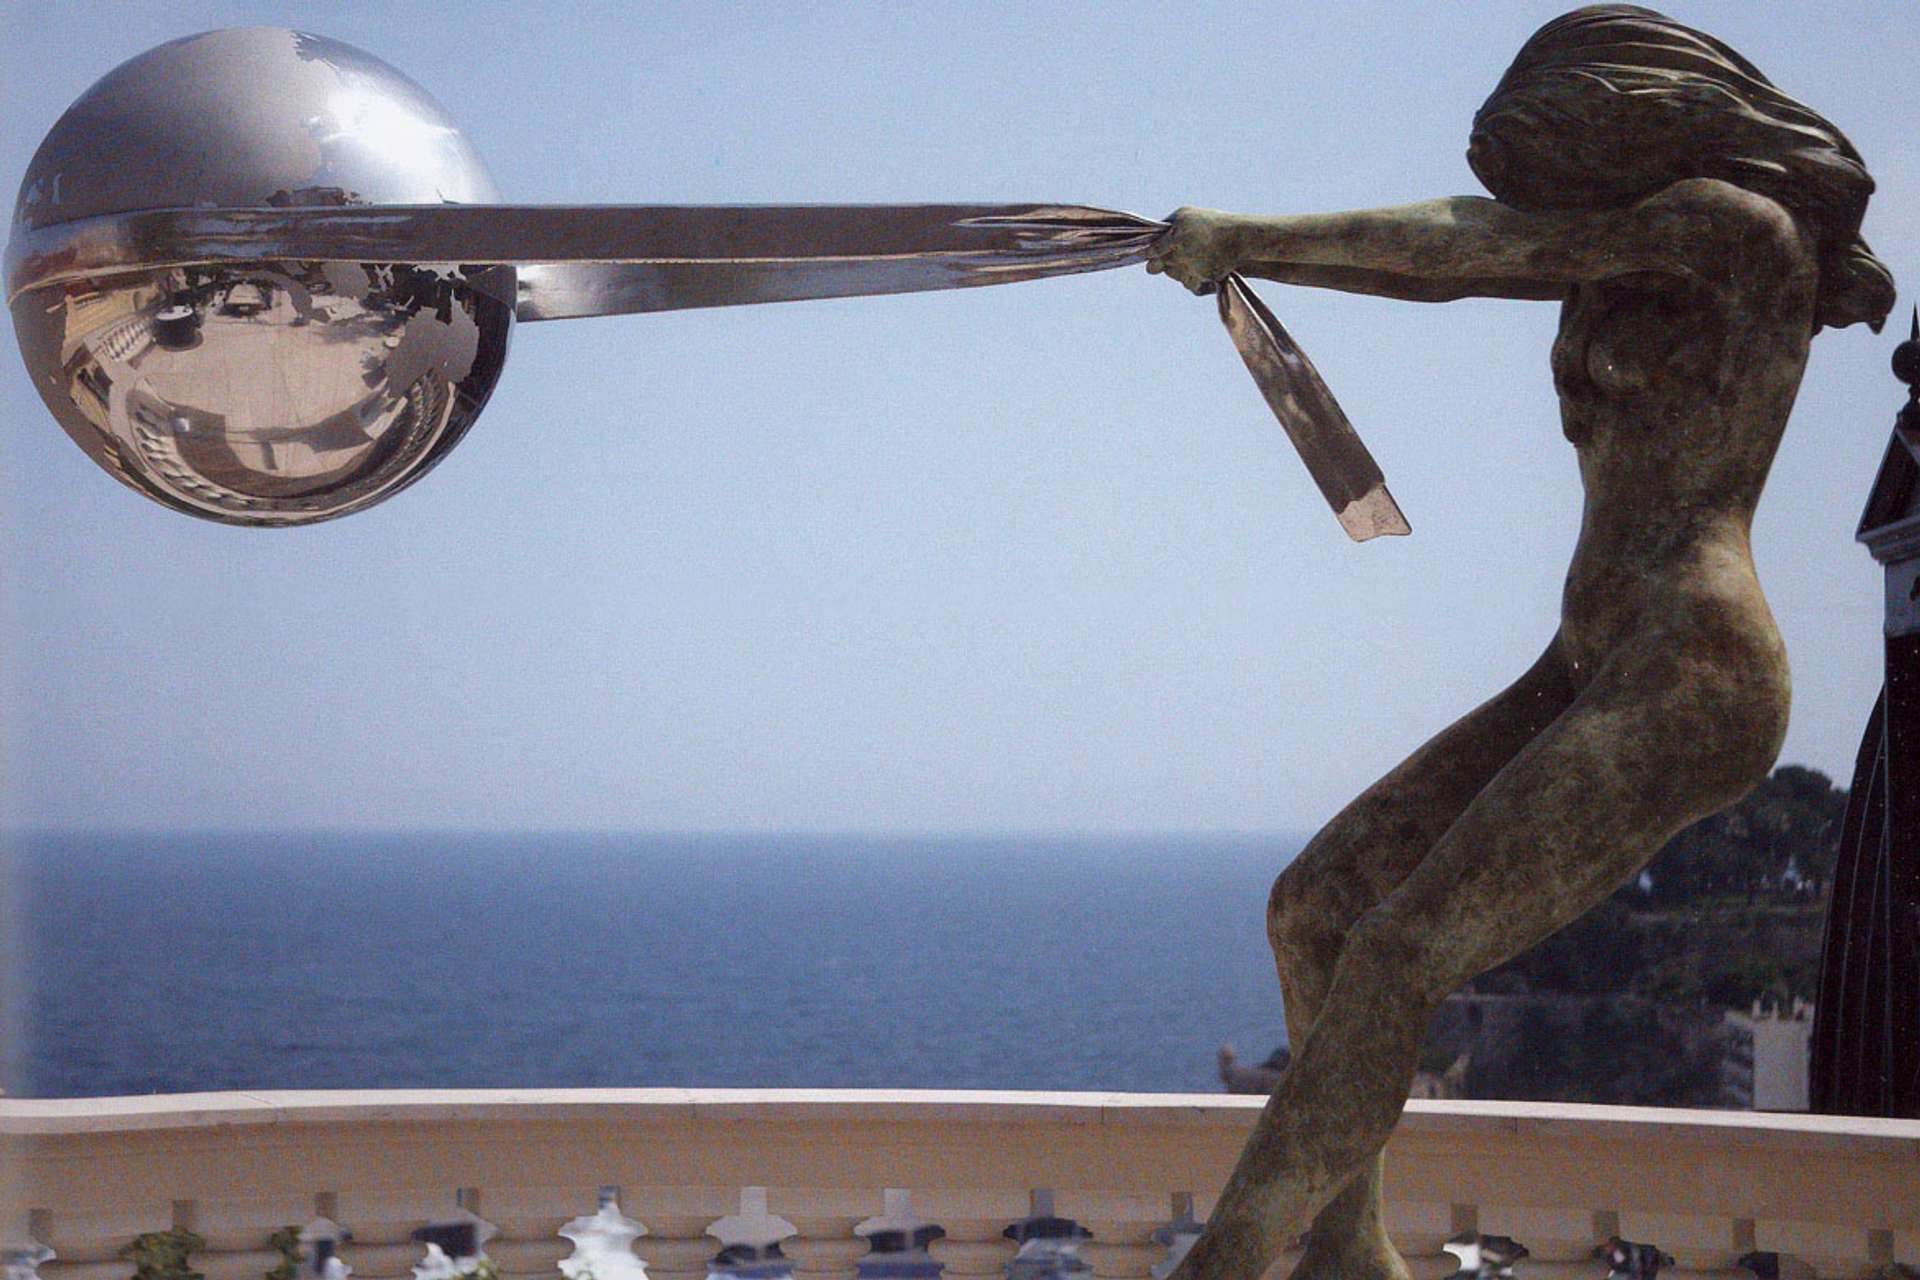 A bronze sculpture titled "The Force of Nature" depicting a large woman emerging from the earth, holding up a globe with her hands.